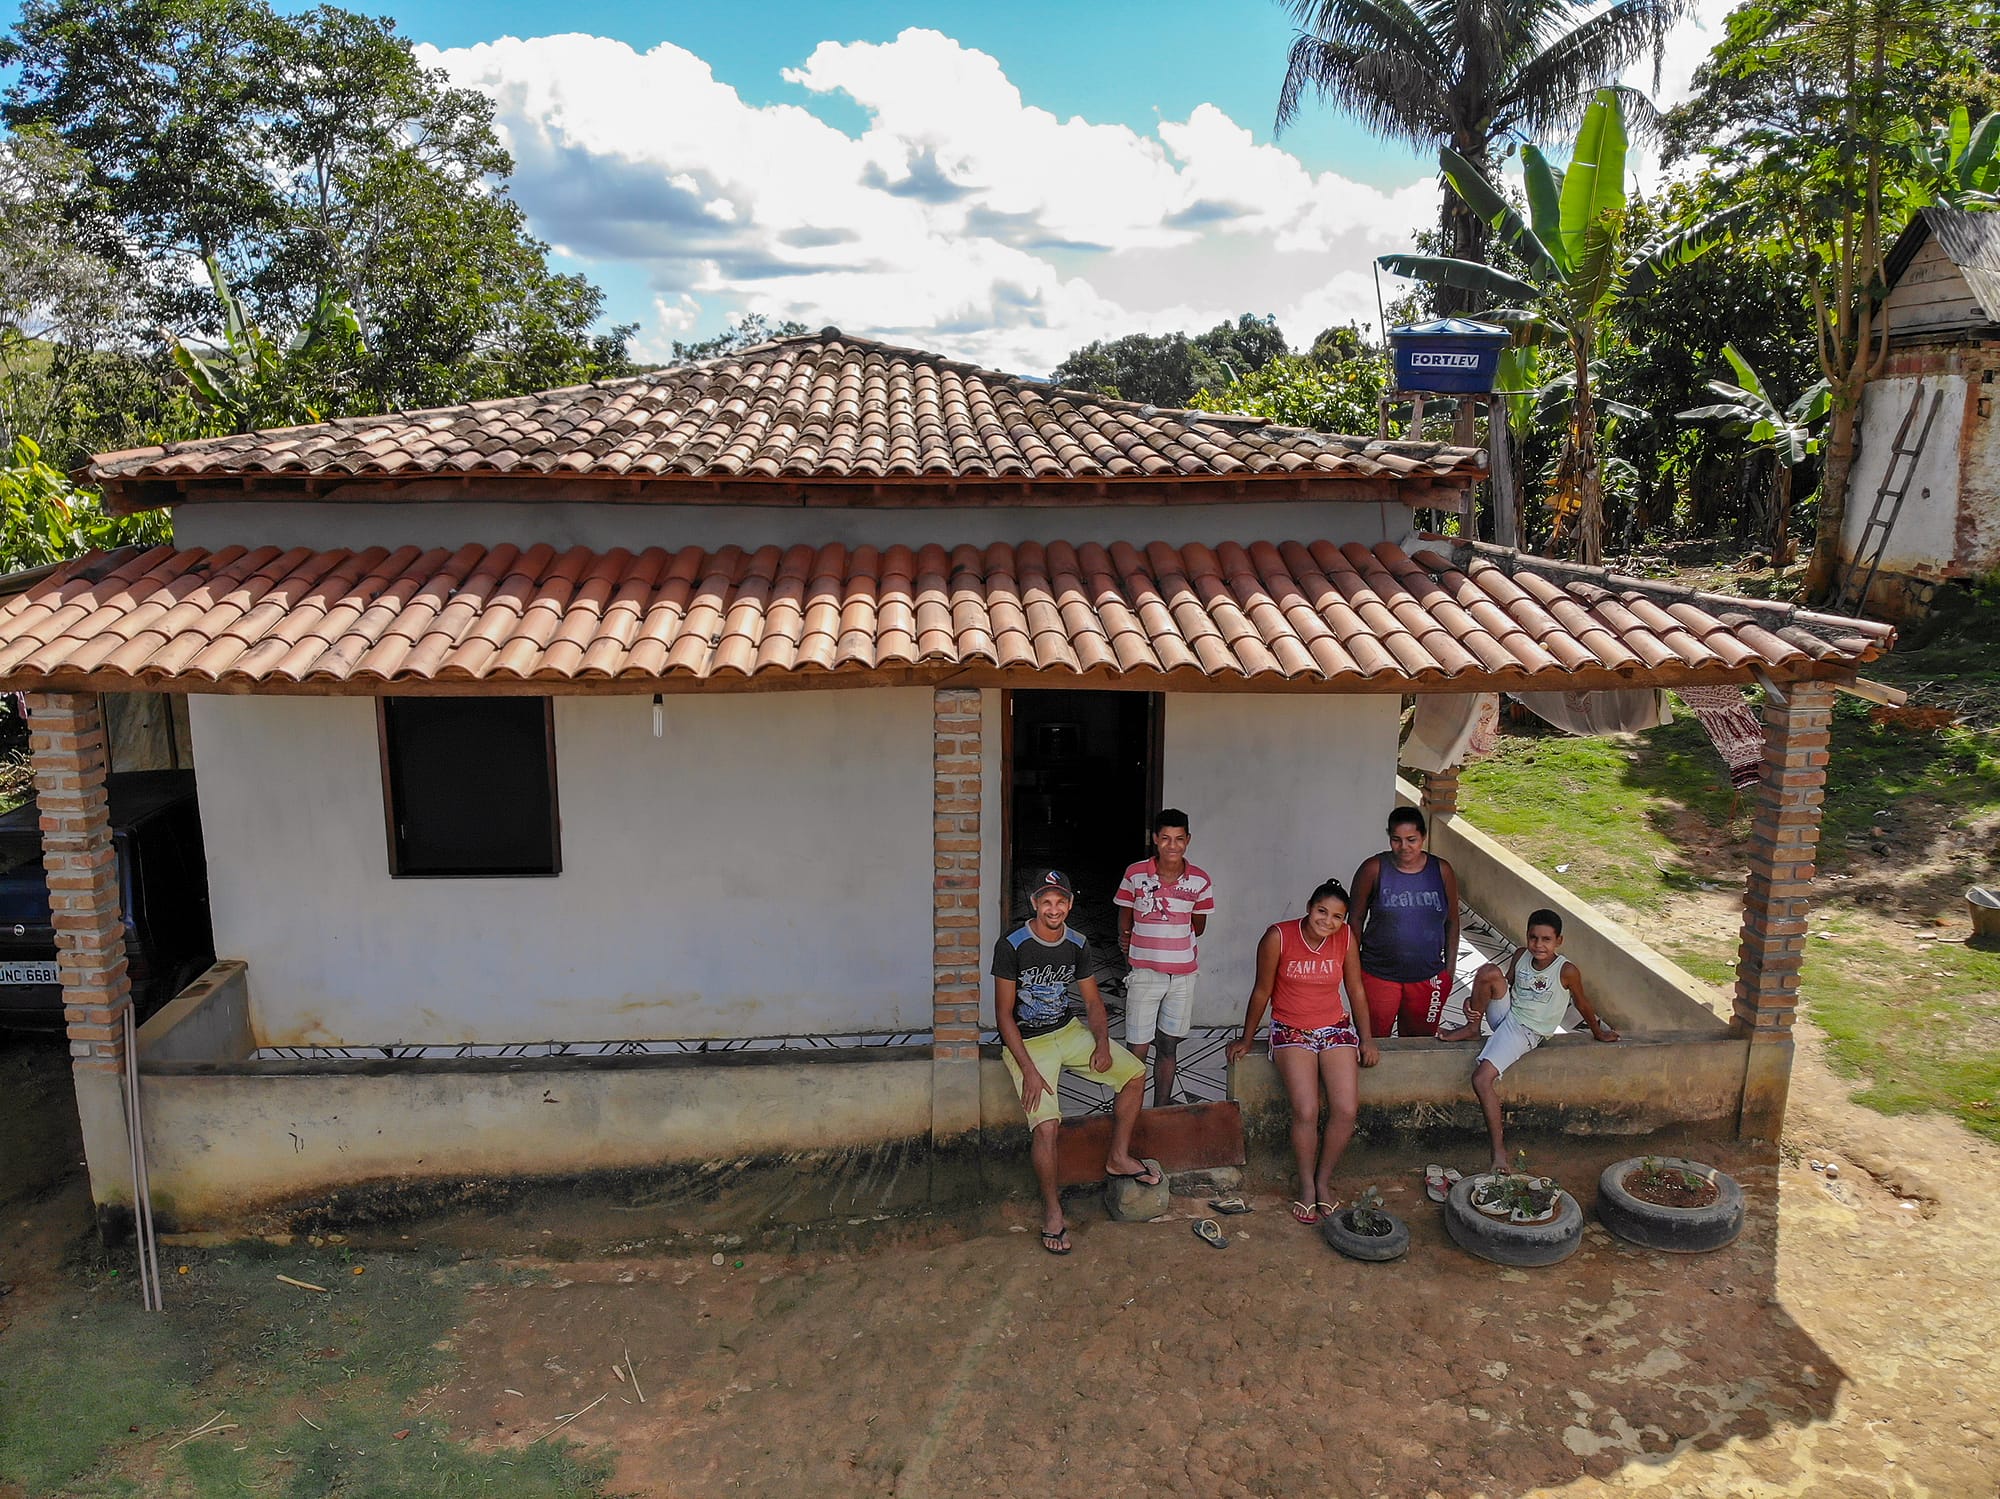 Family in front of their house in rural setting